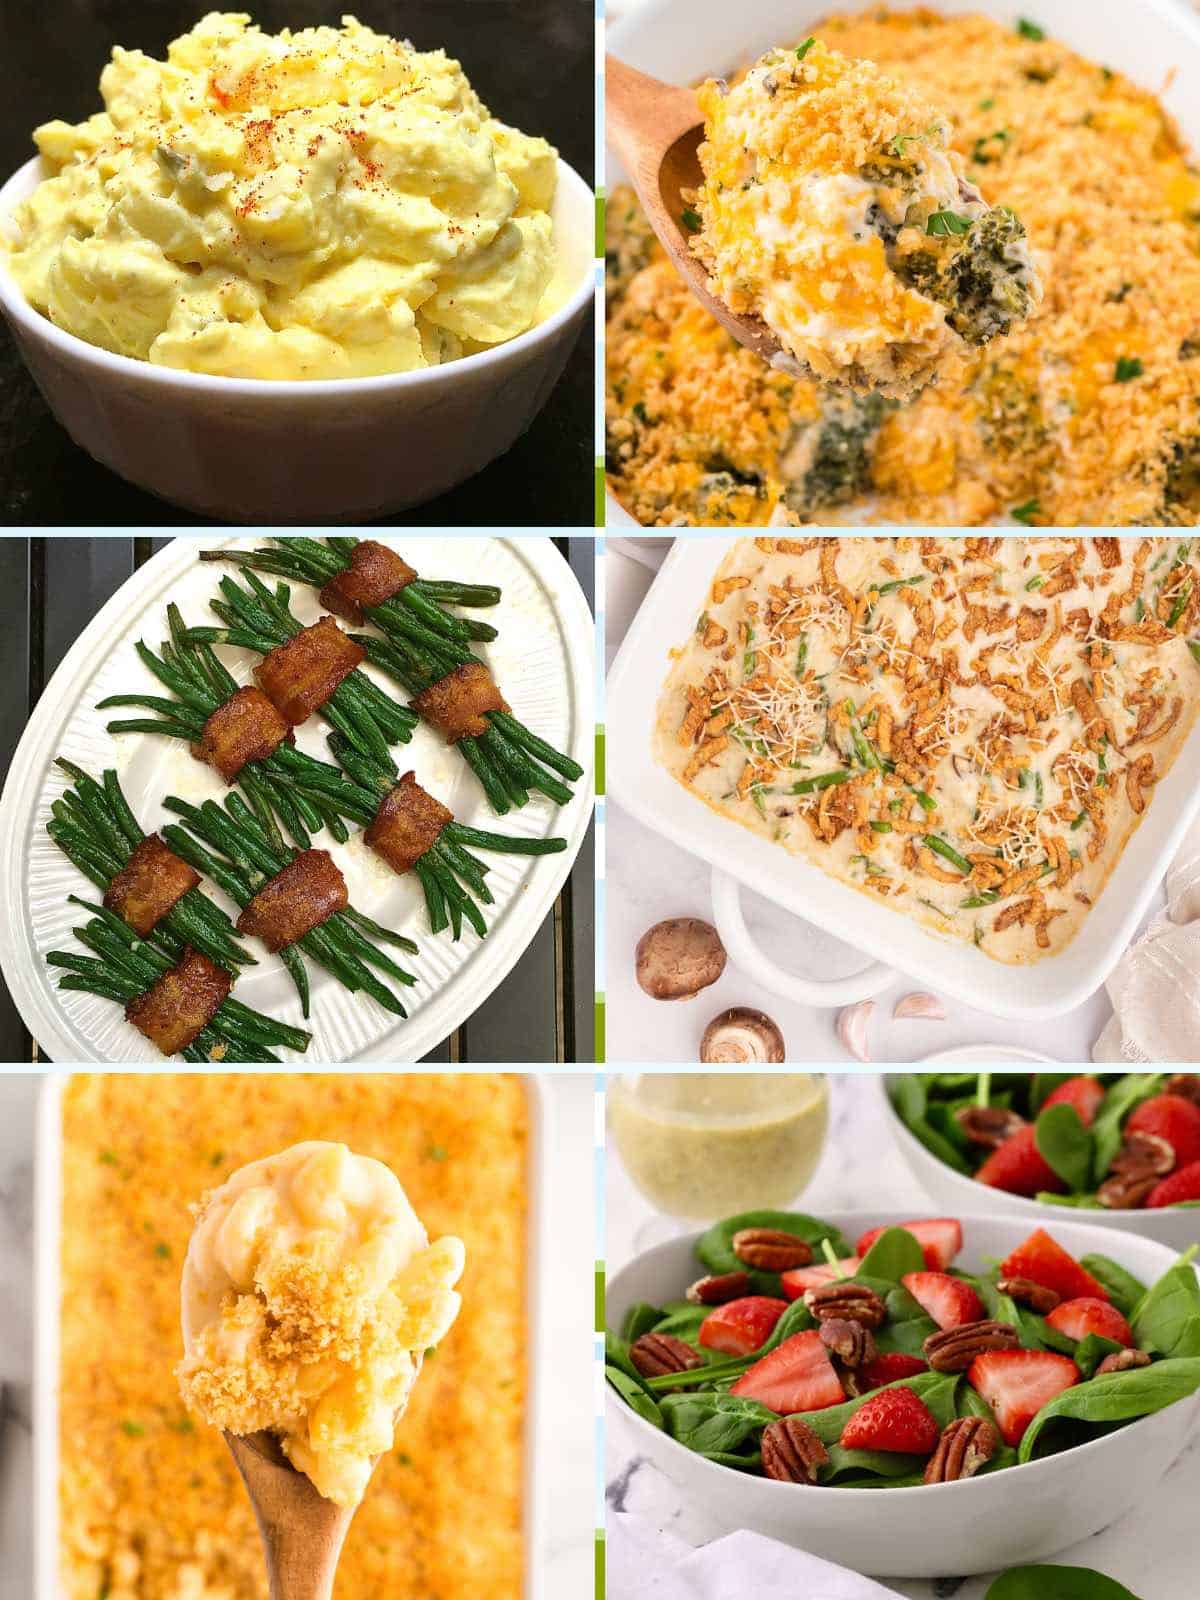 Pictures of 6 Easter side dishes including Spinach Salad, Potato Salad and Broccoli Cheese Casserole. 